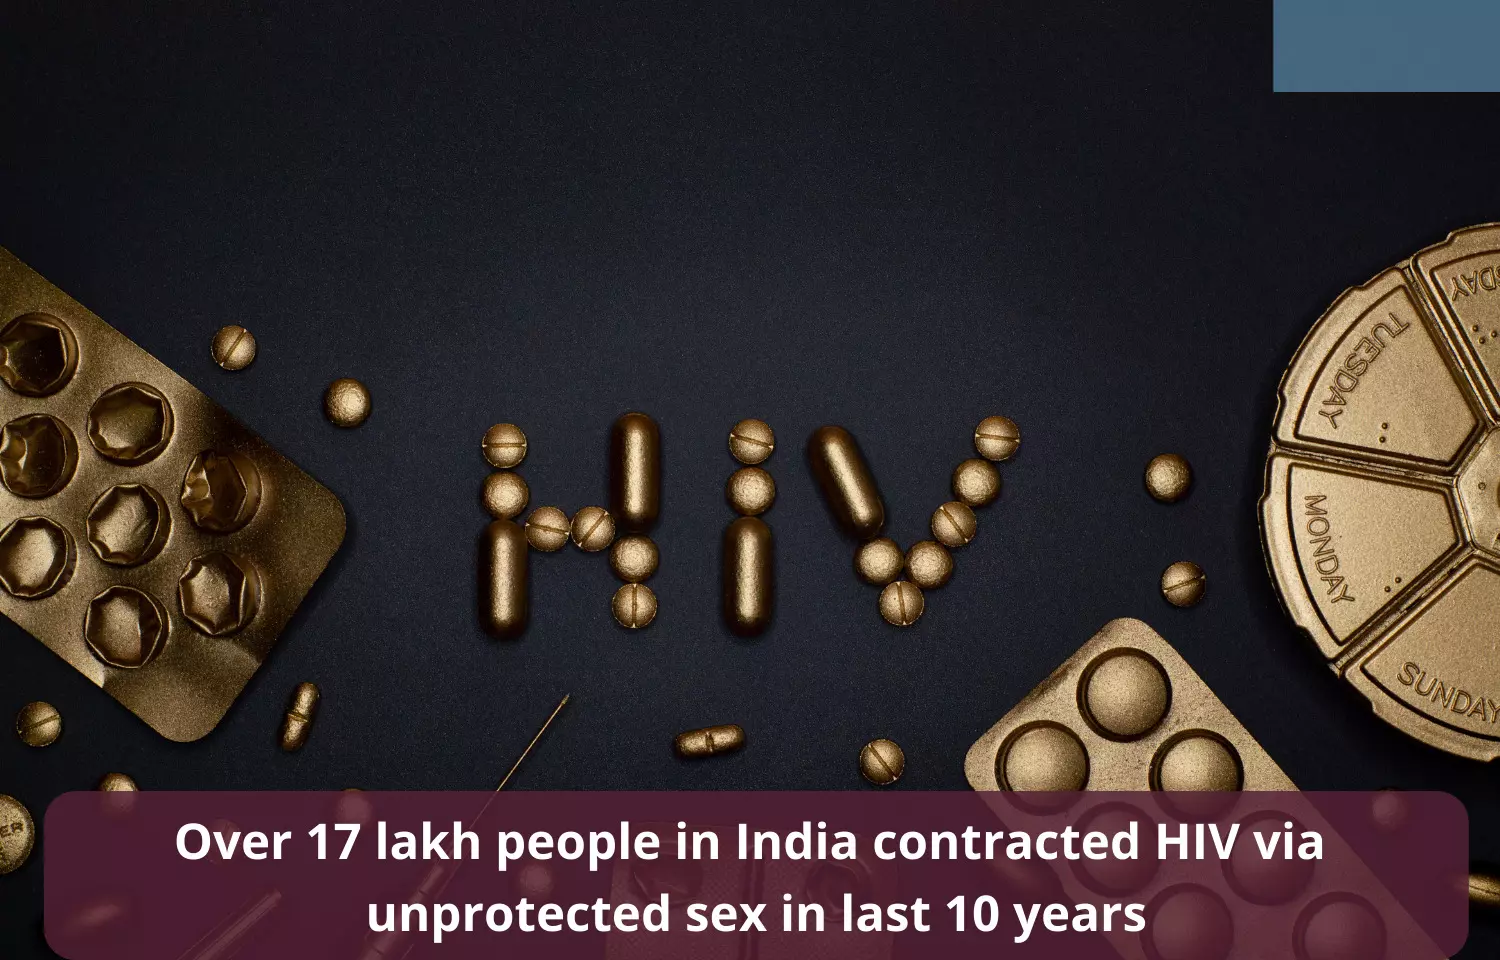 Over 17 lakh people in India contracted HIV via unprotected sex in last 10 years